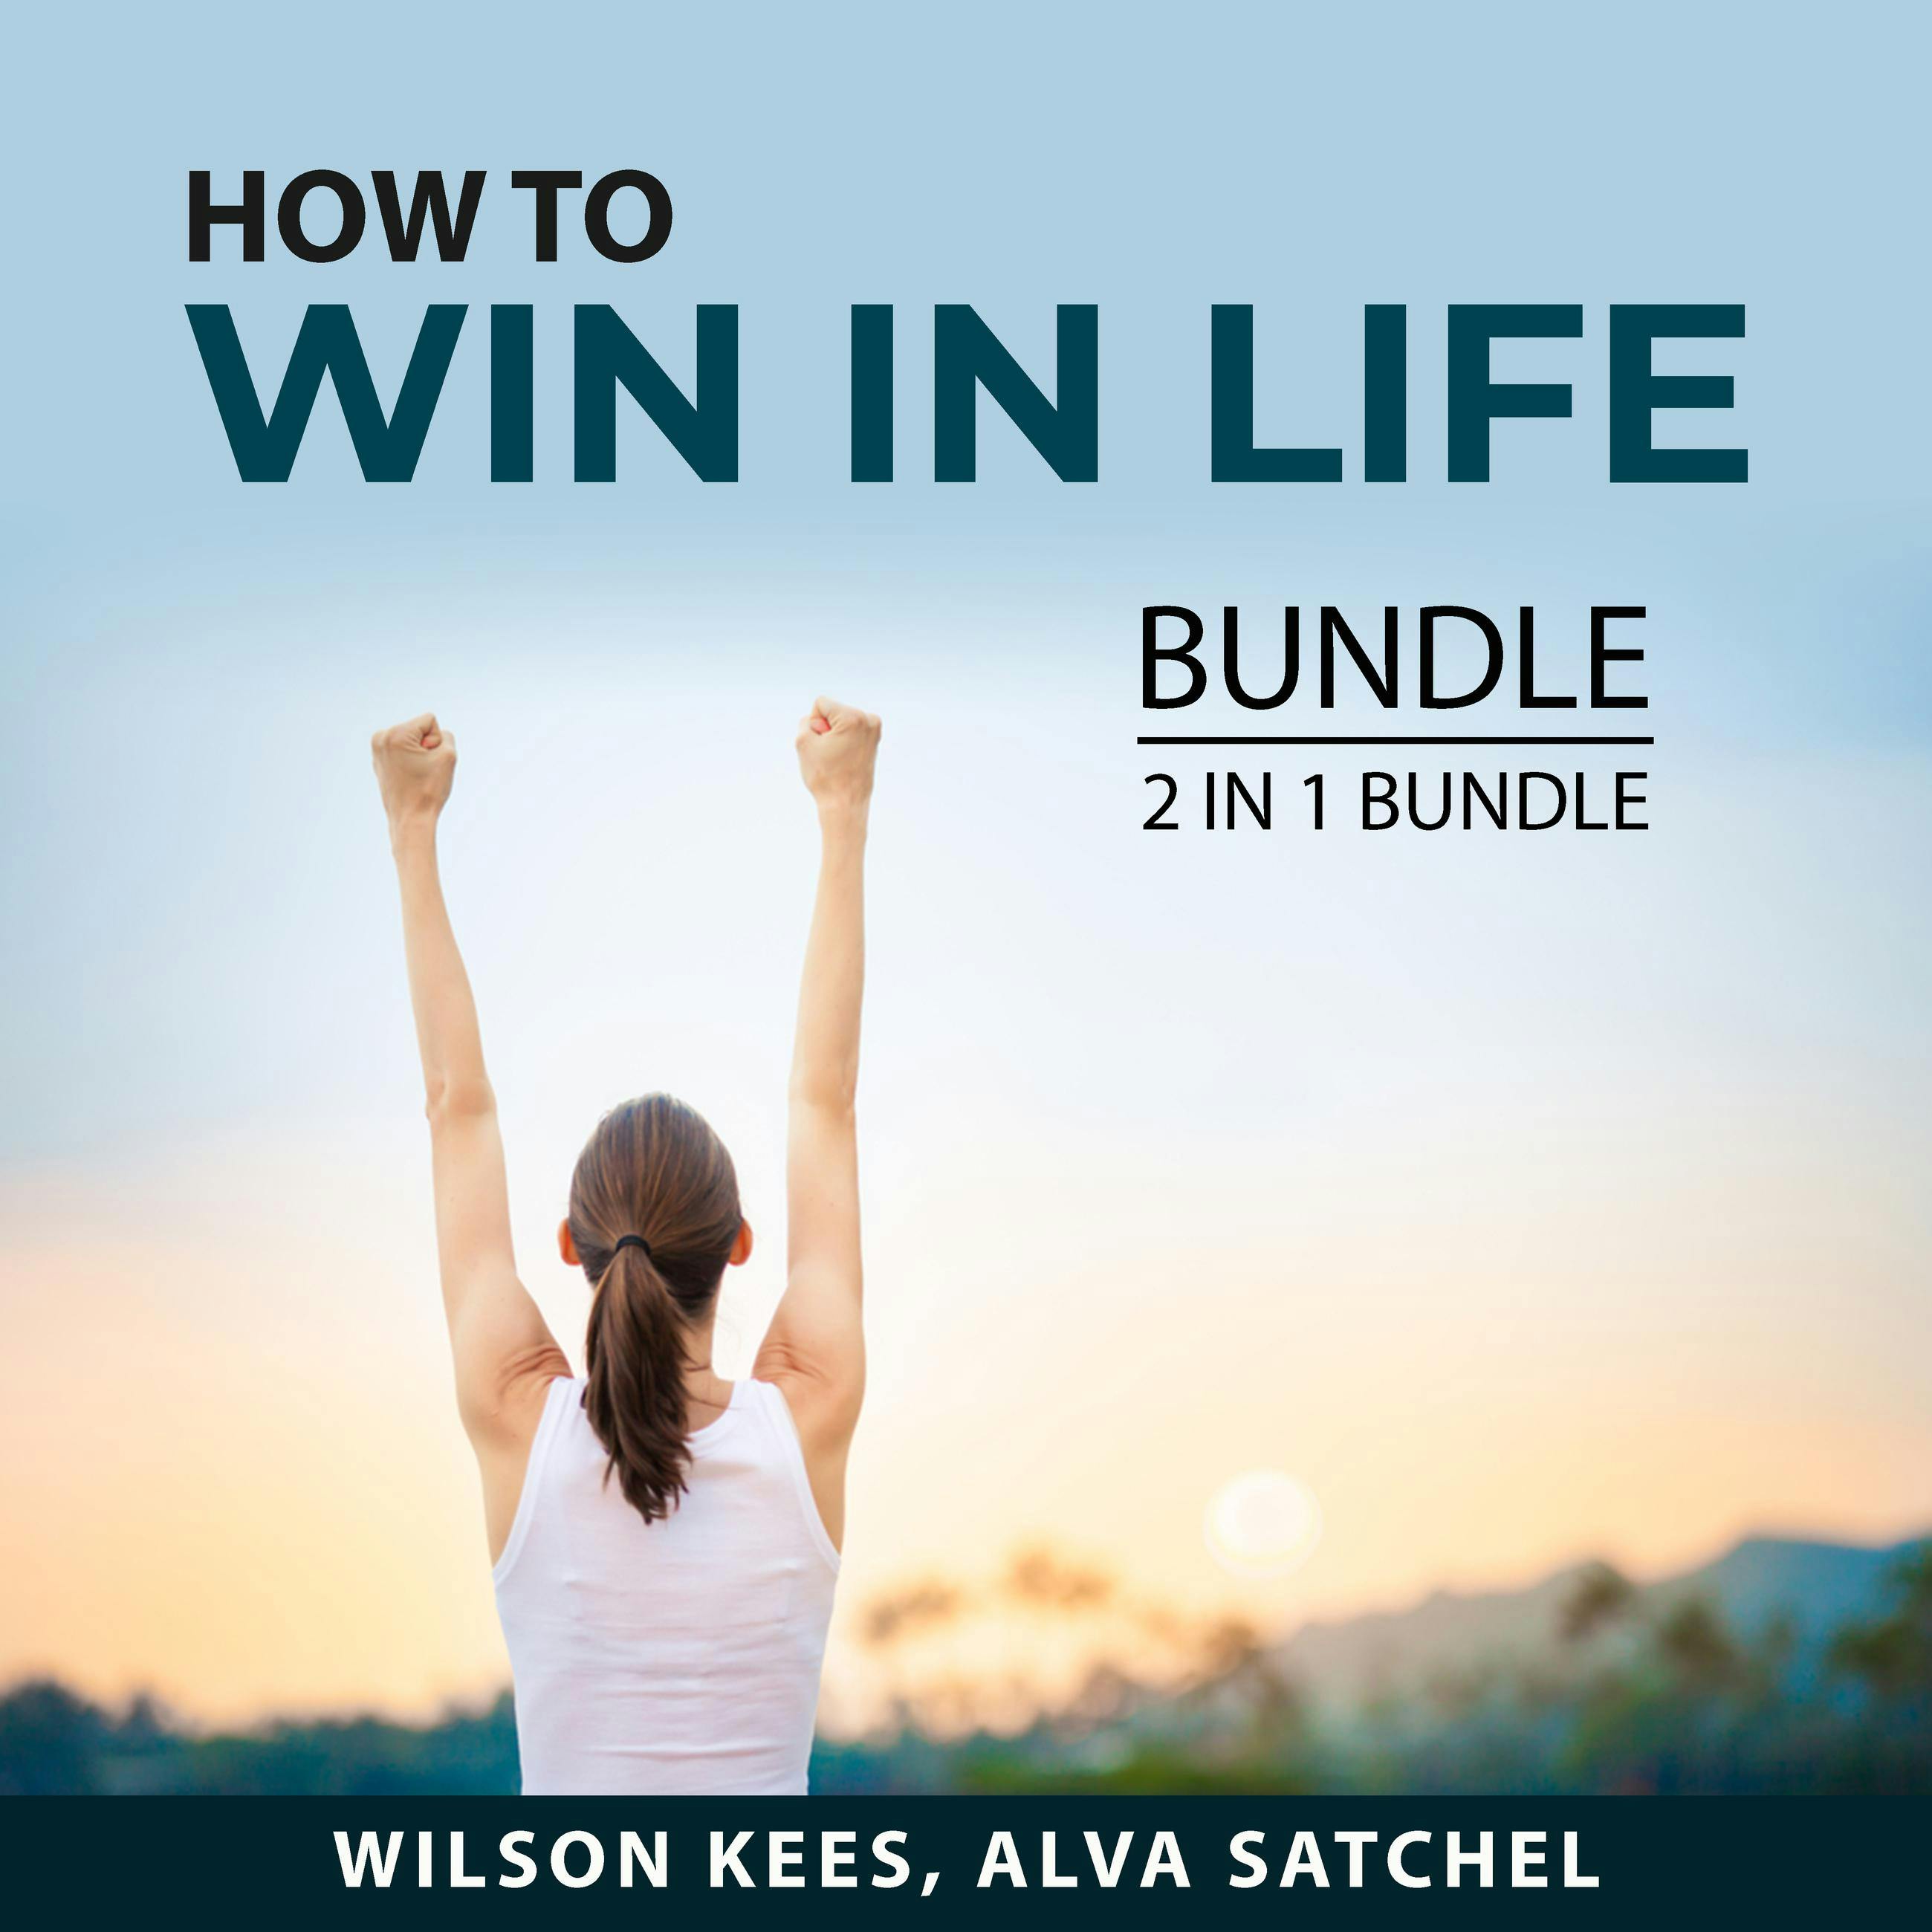 How to Win in Life Bundle, 2 in 1 Bundle: Better Lifestyle for Success and Secrets of the Rich and Wealthy - Alva Satchel, Wilson Kees